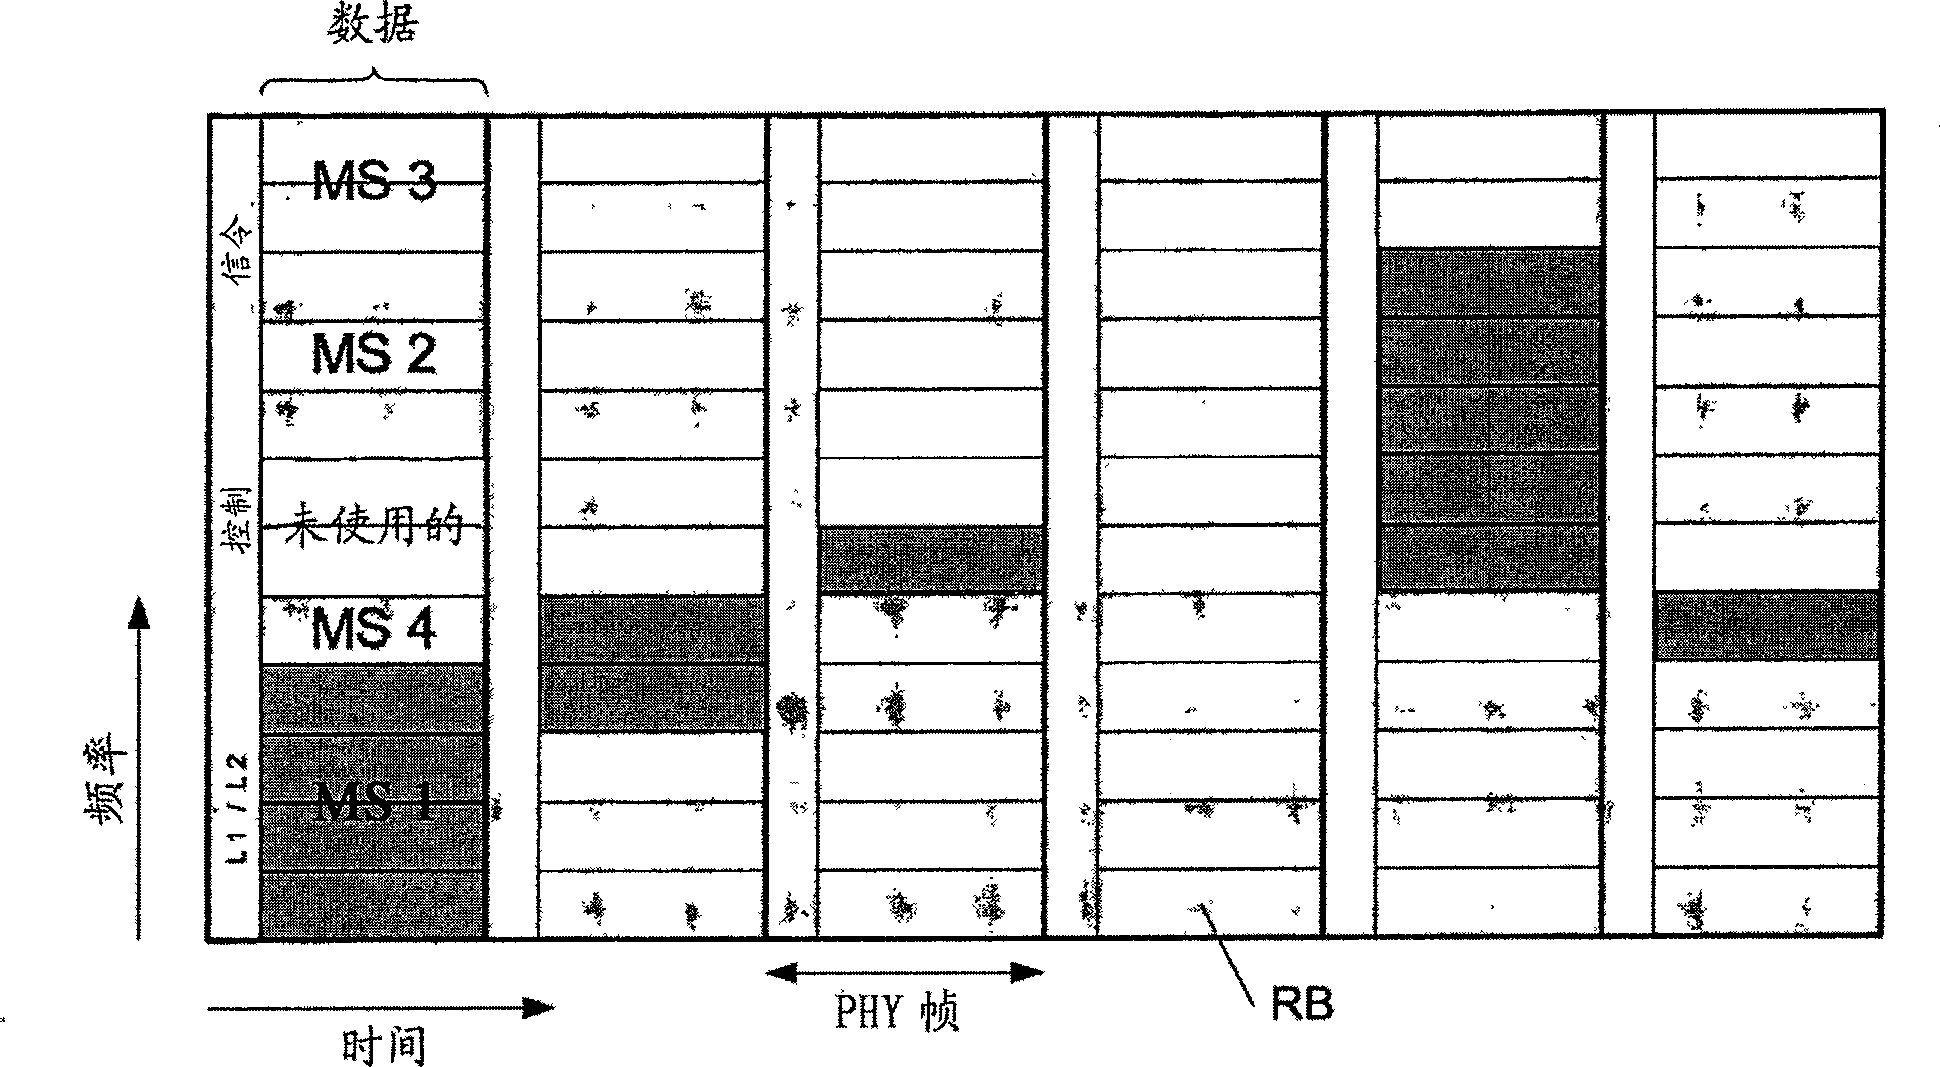 Resource block candidate selection technique employing packet scheduling in wireless communication systems